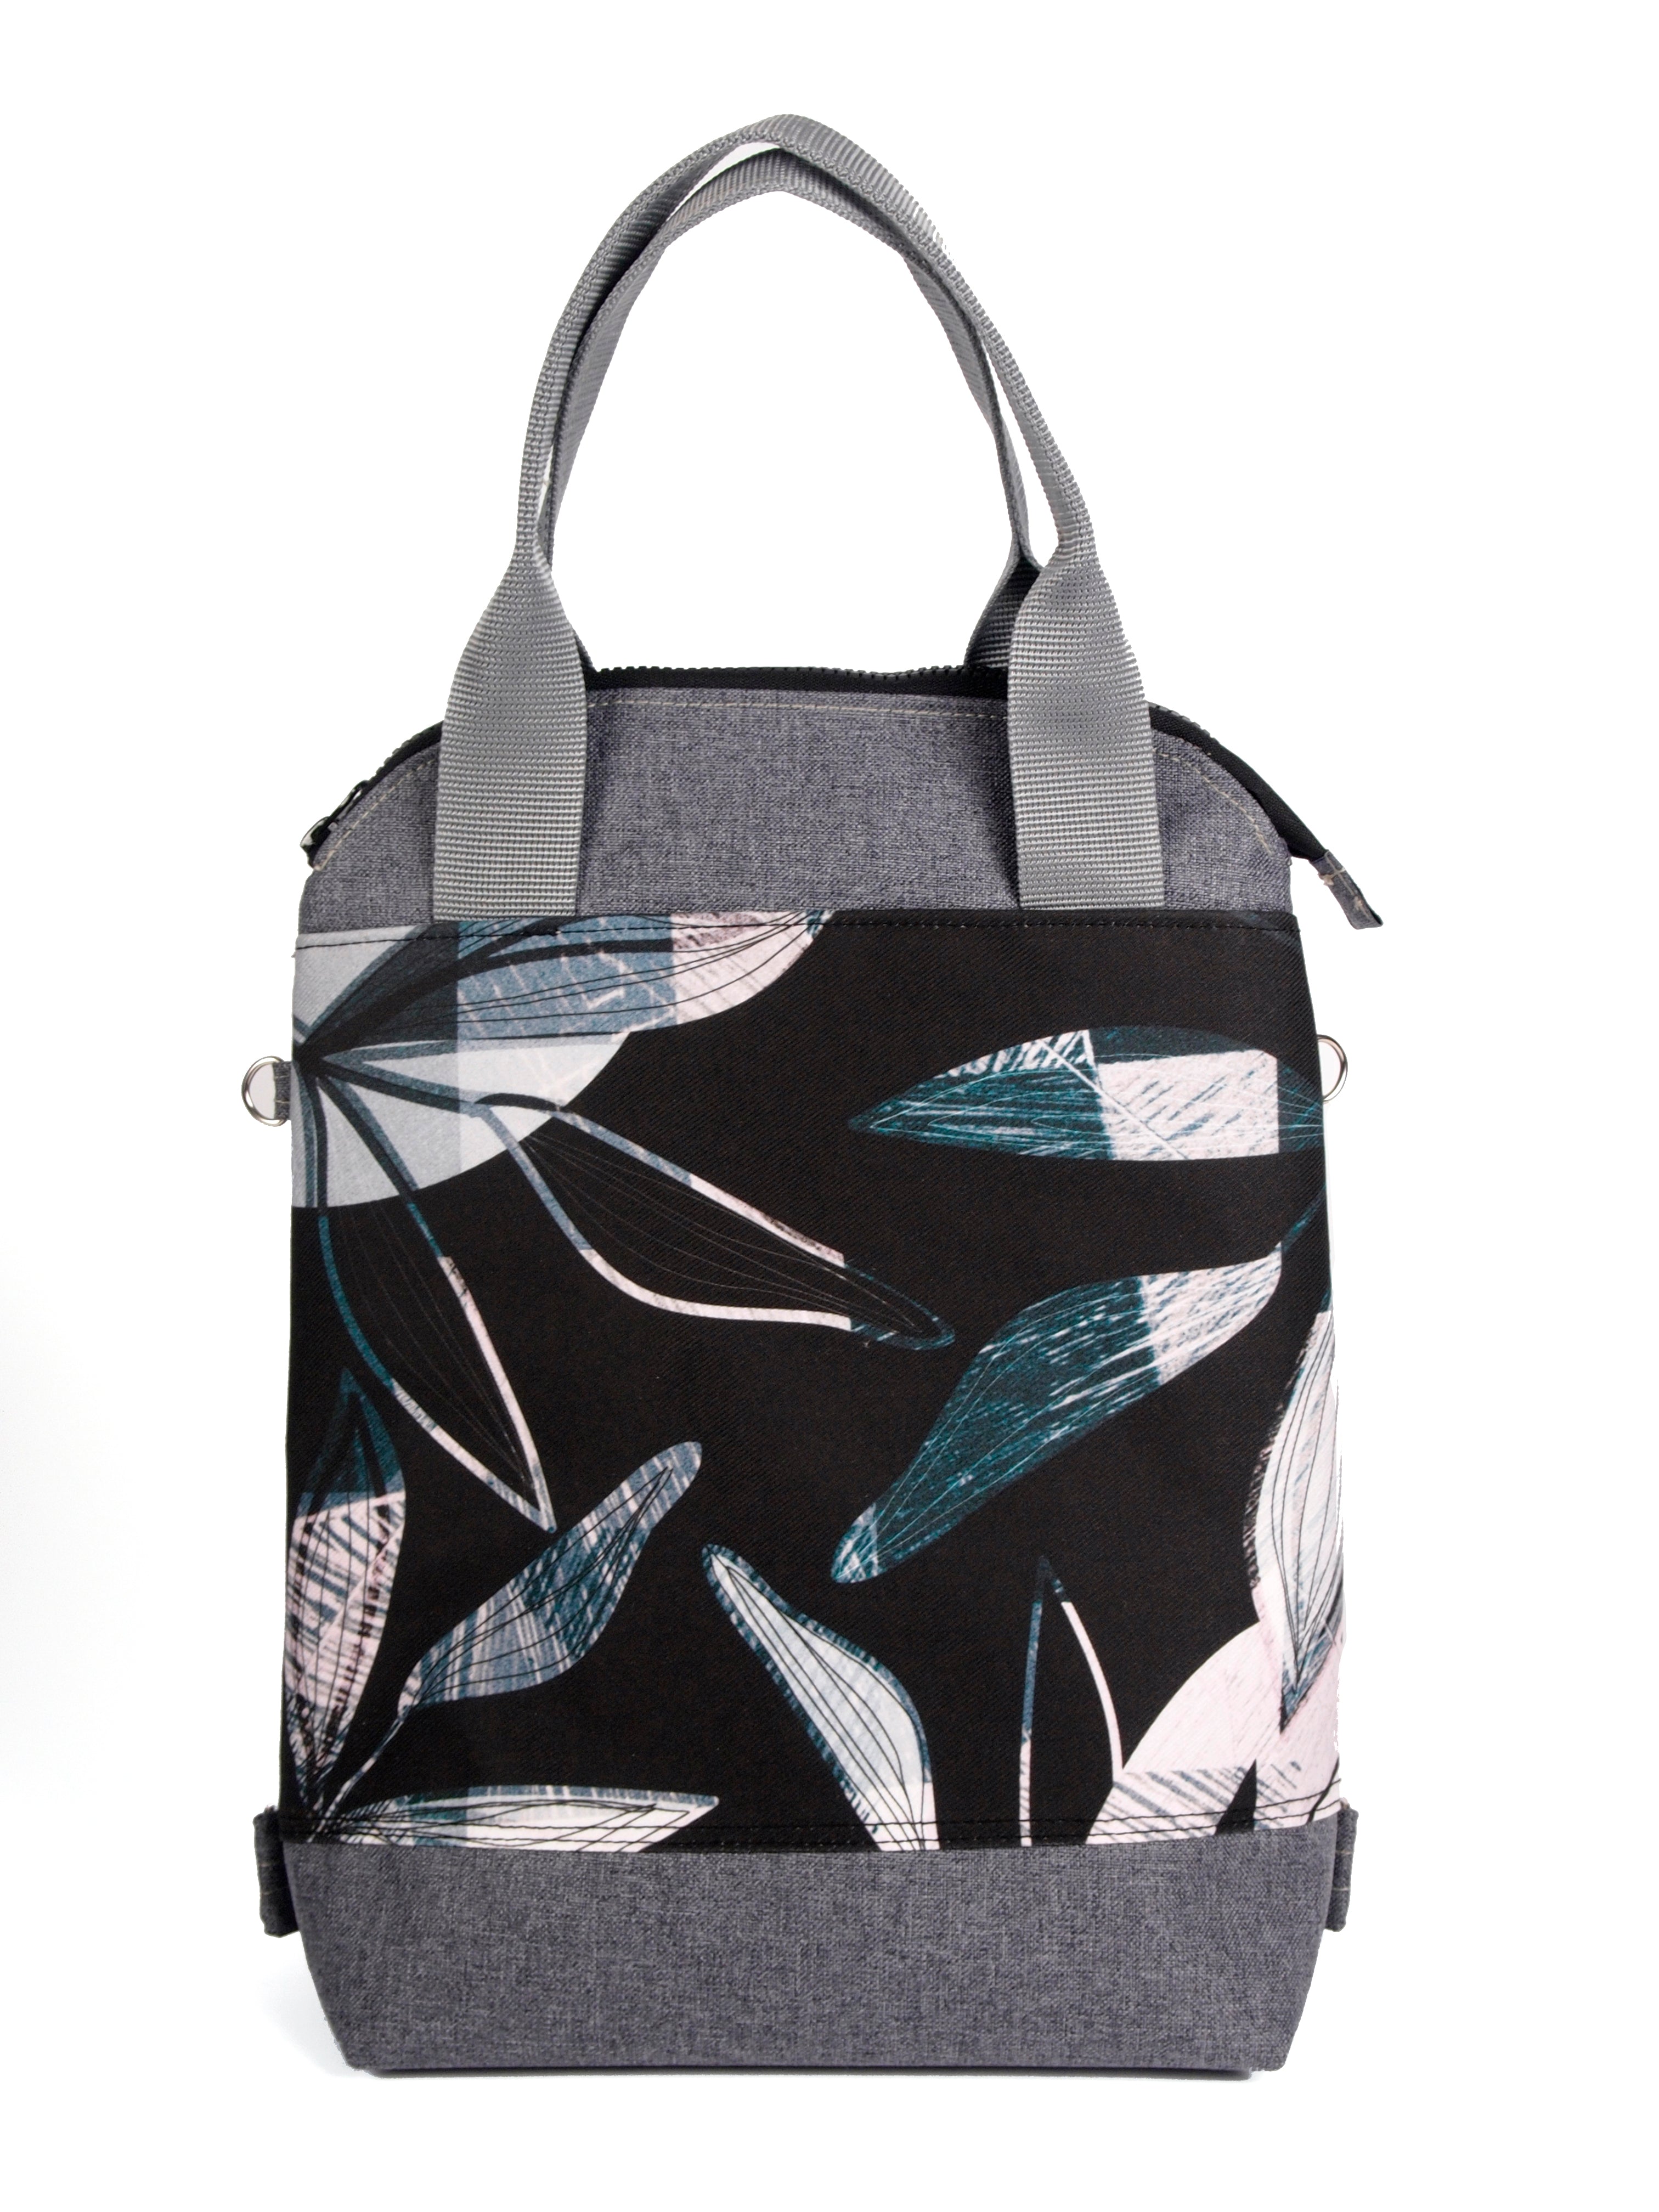 Bardo classic backpack textiles - Frozen leaves